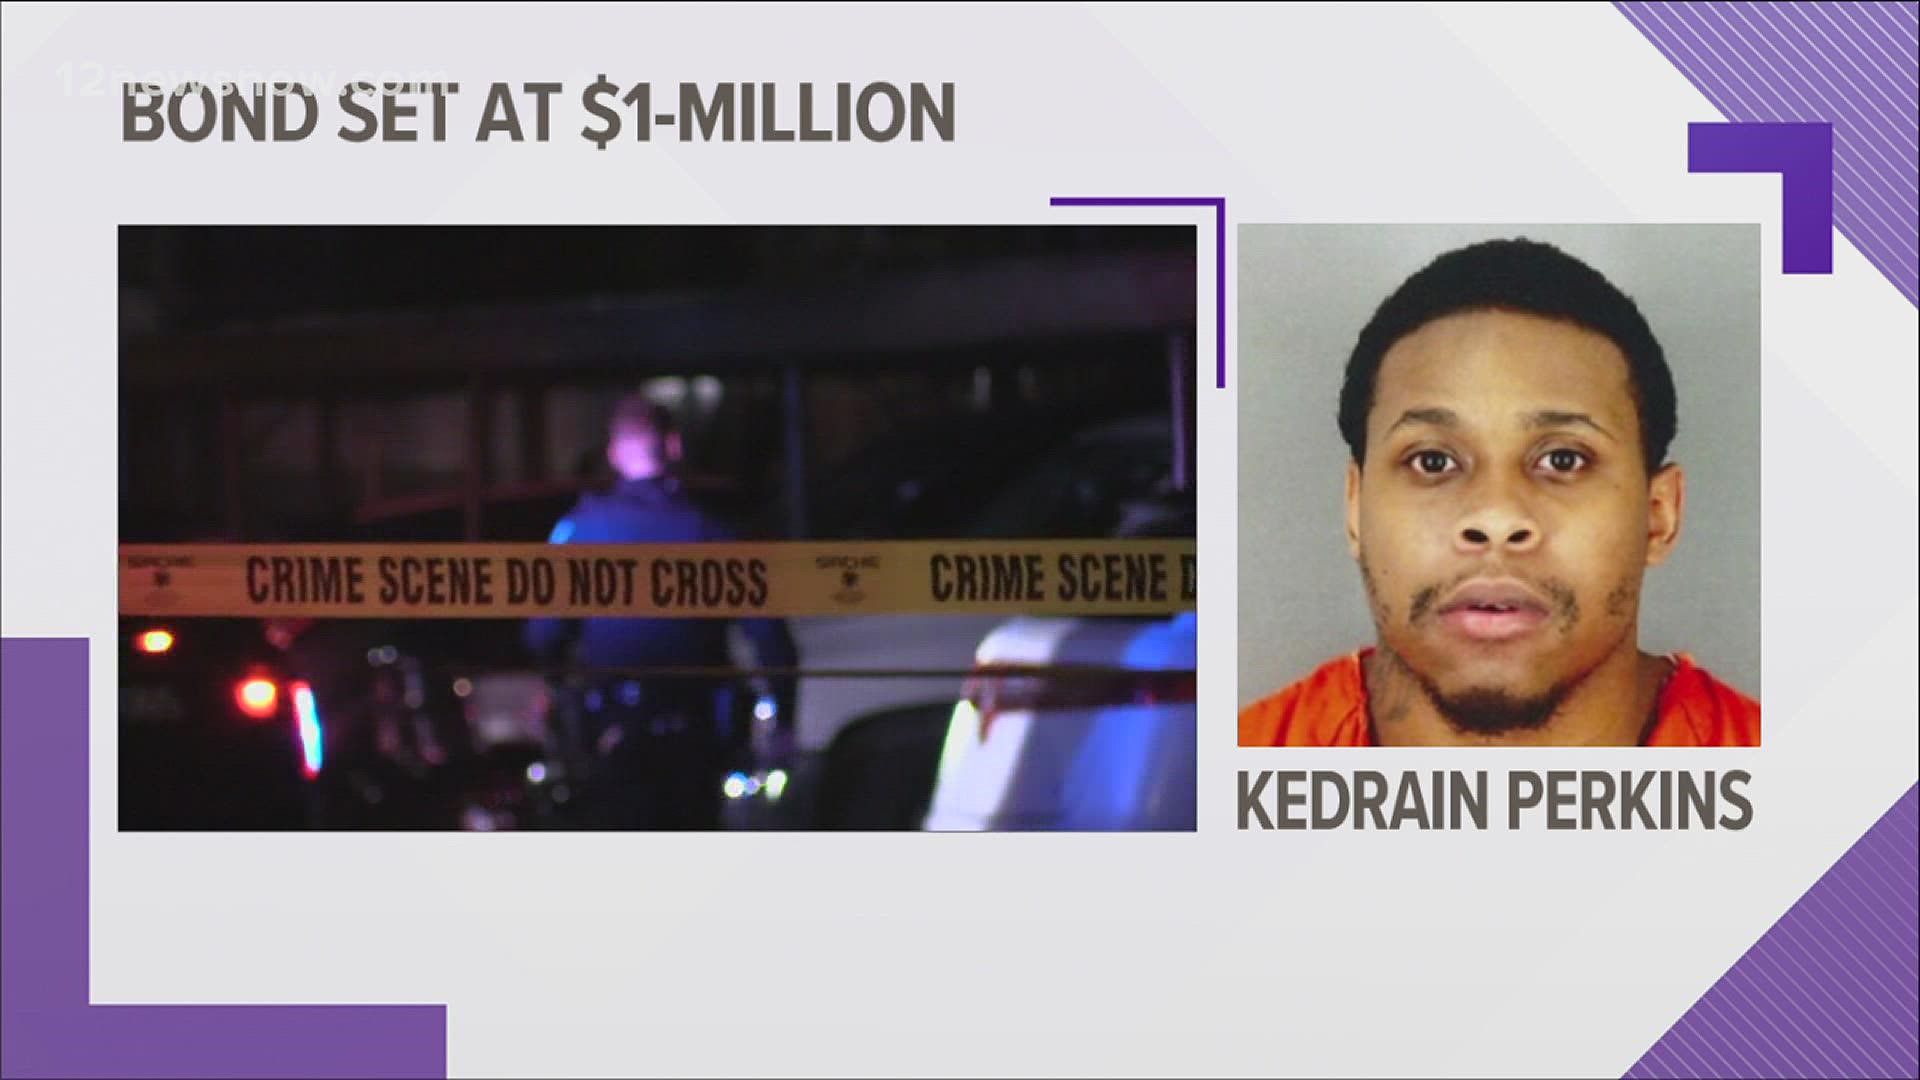 Kedrain Perkins is currently being held in the Jefferson County Jail on a $1 million bond.